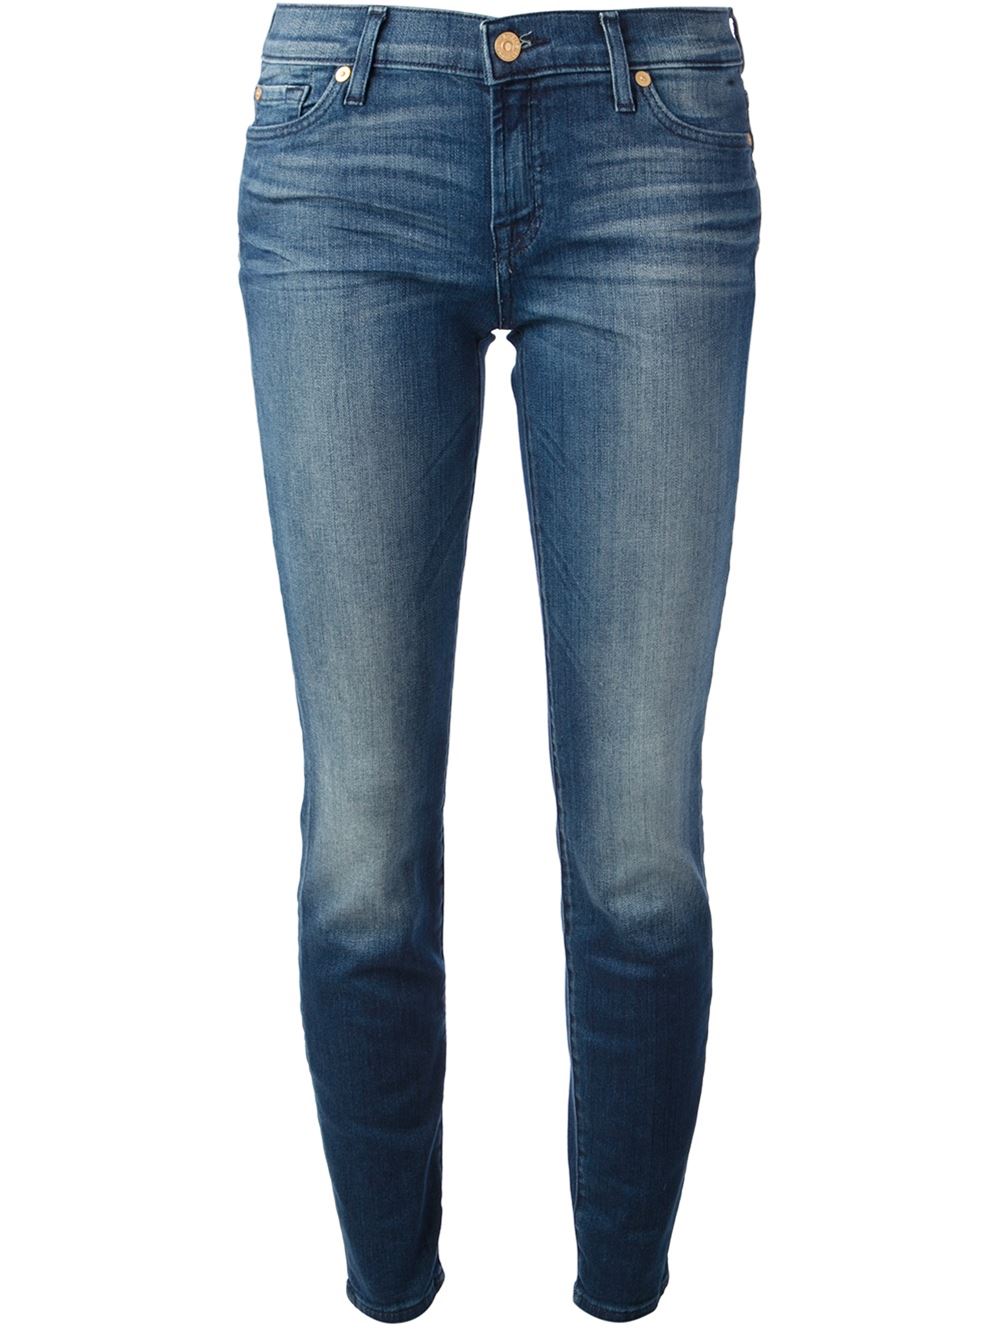 Blue cotton blend The Skinny jean from 7 For All Mankind